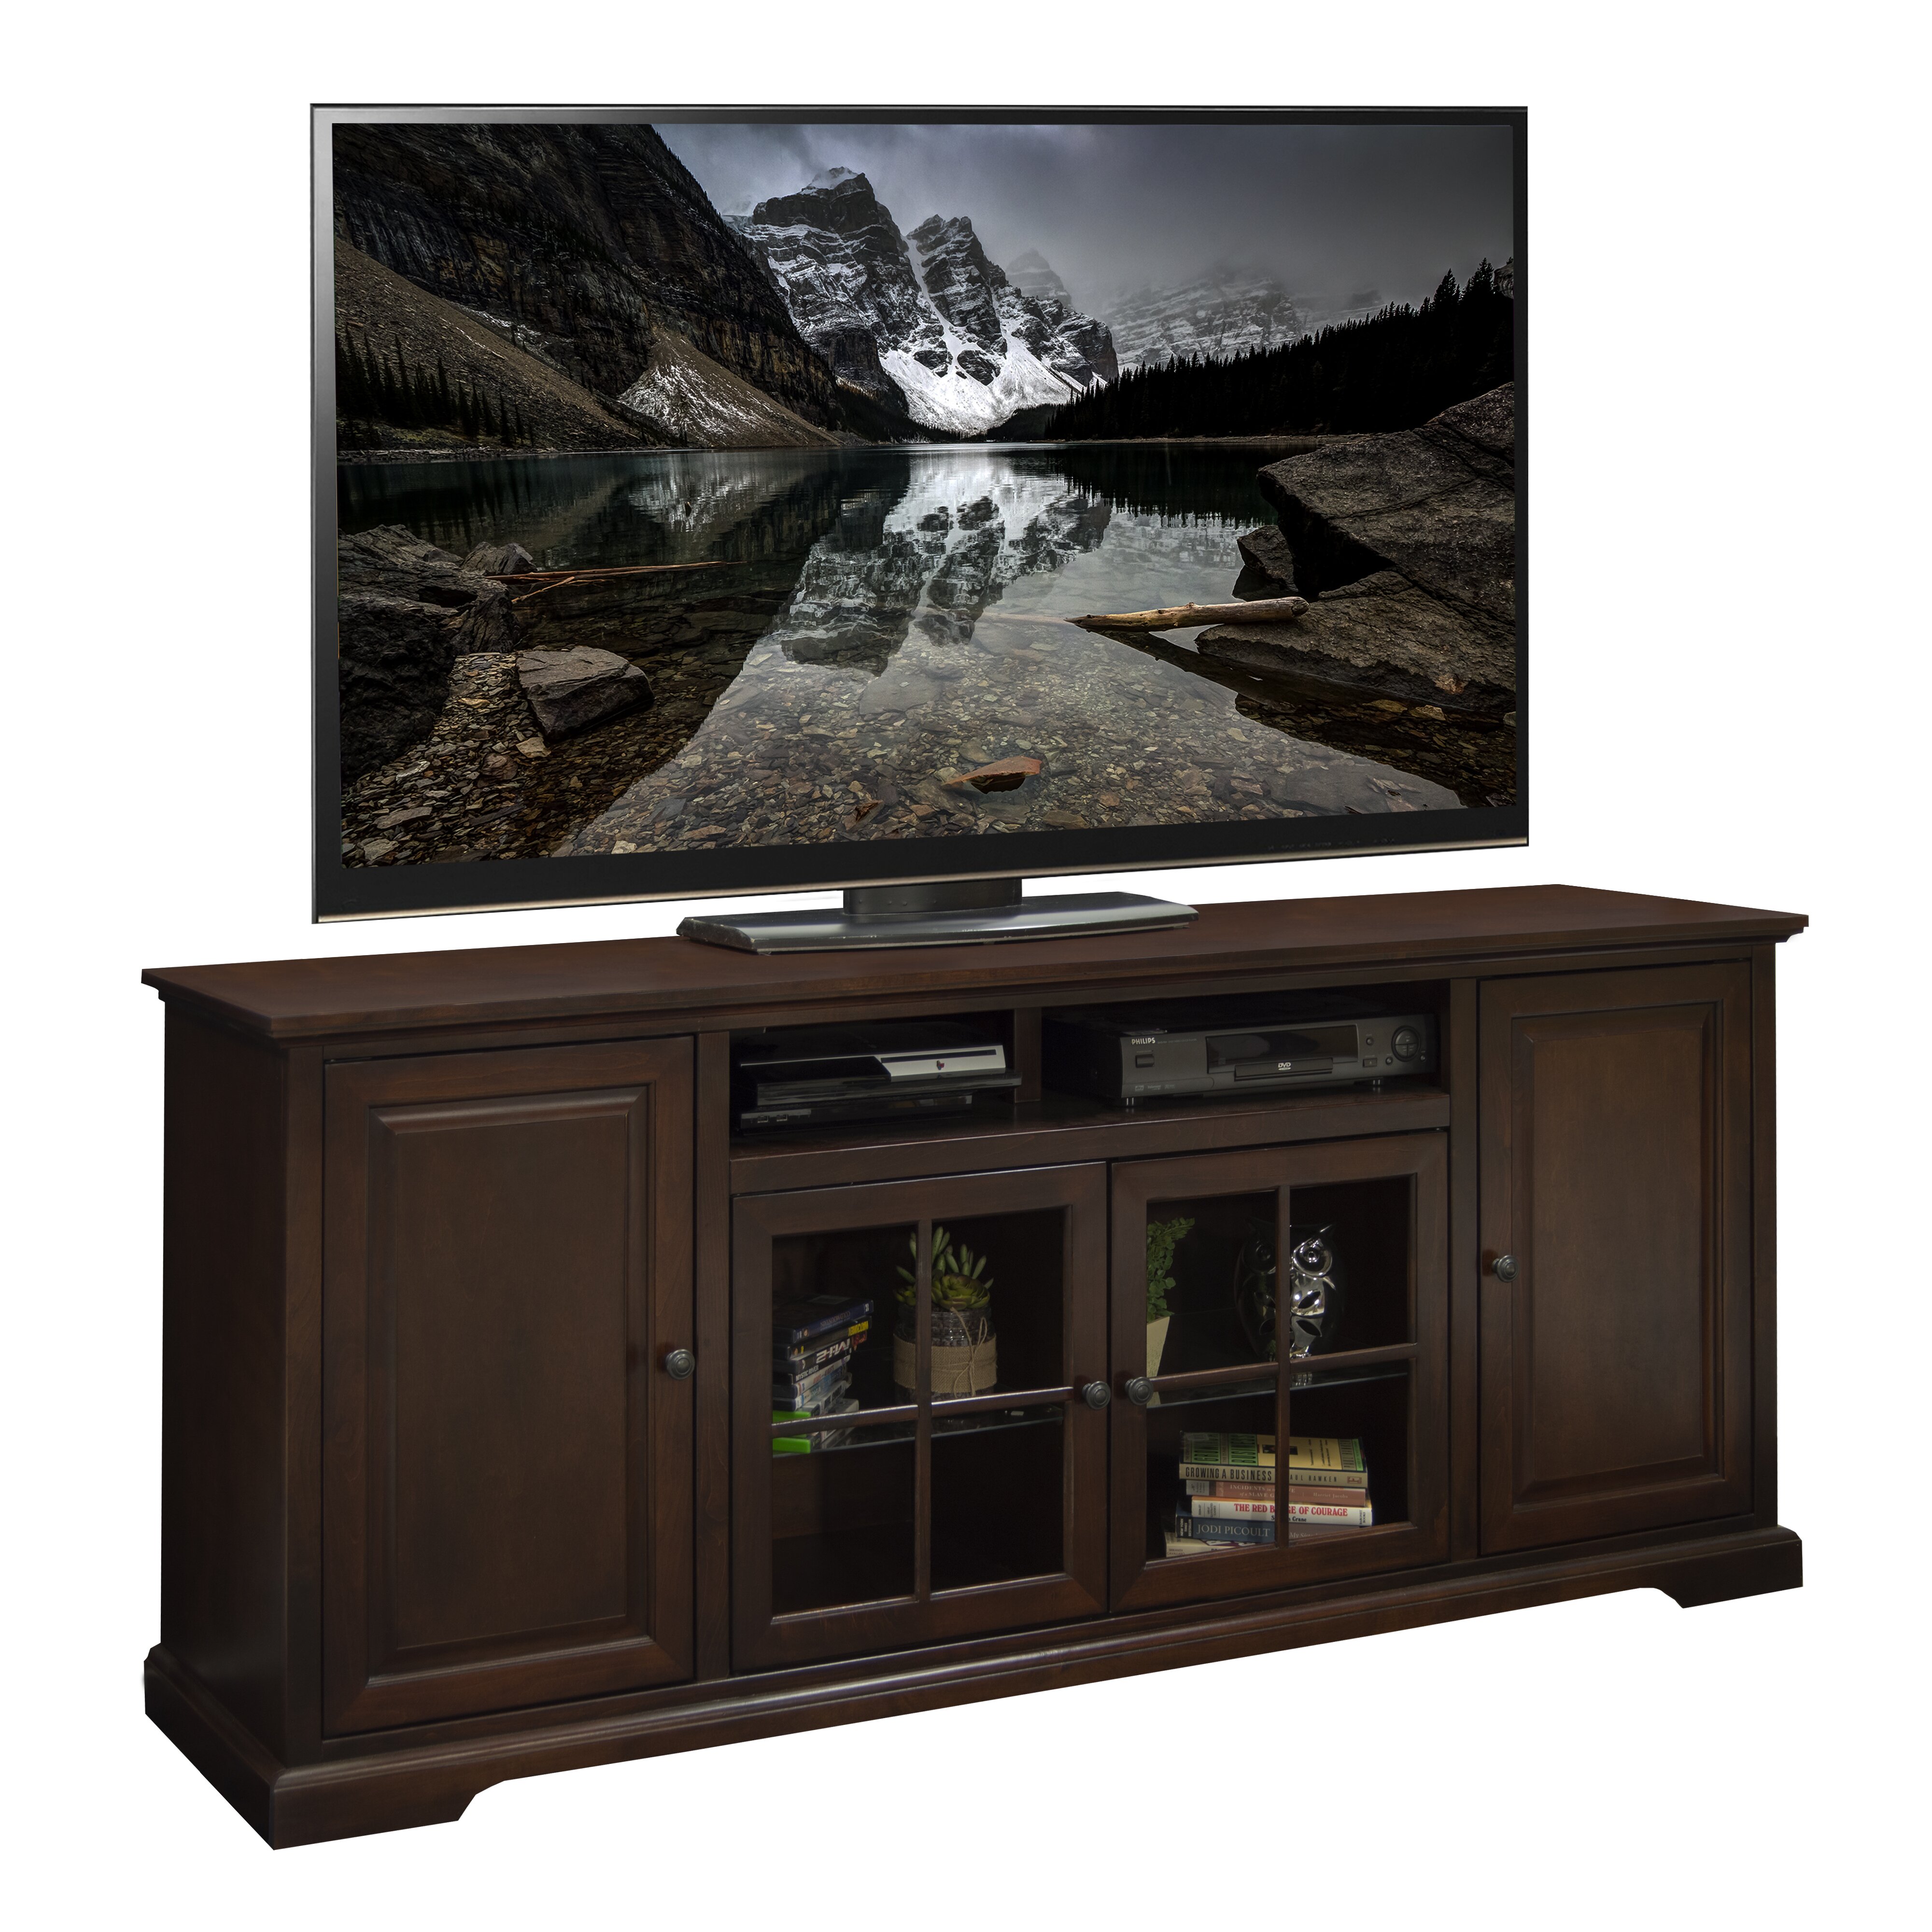 Darby Home Co Legrand TV Stand & Reviews | Wayfair